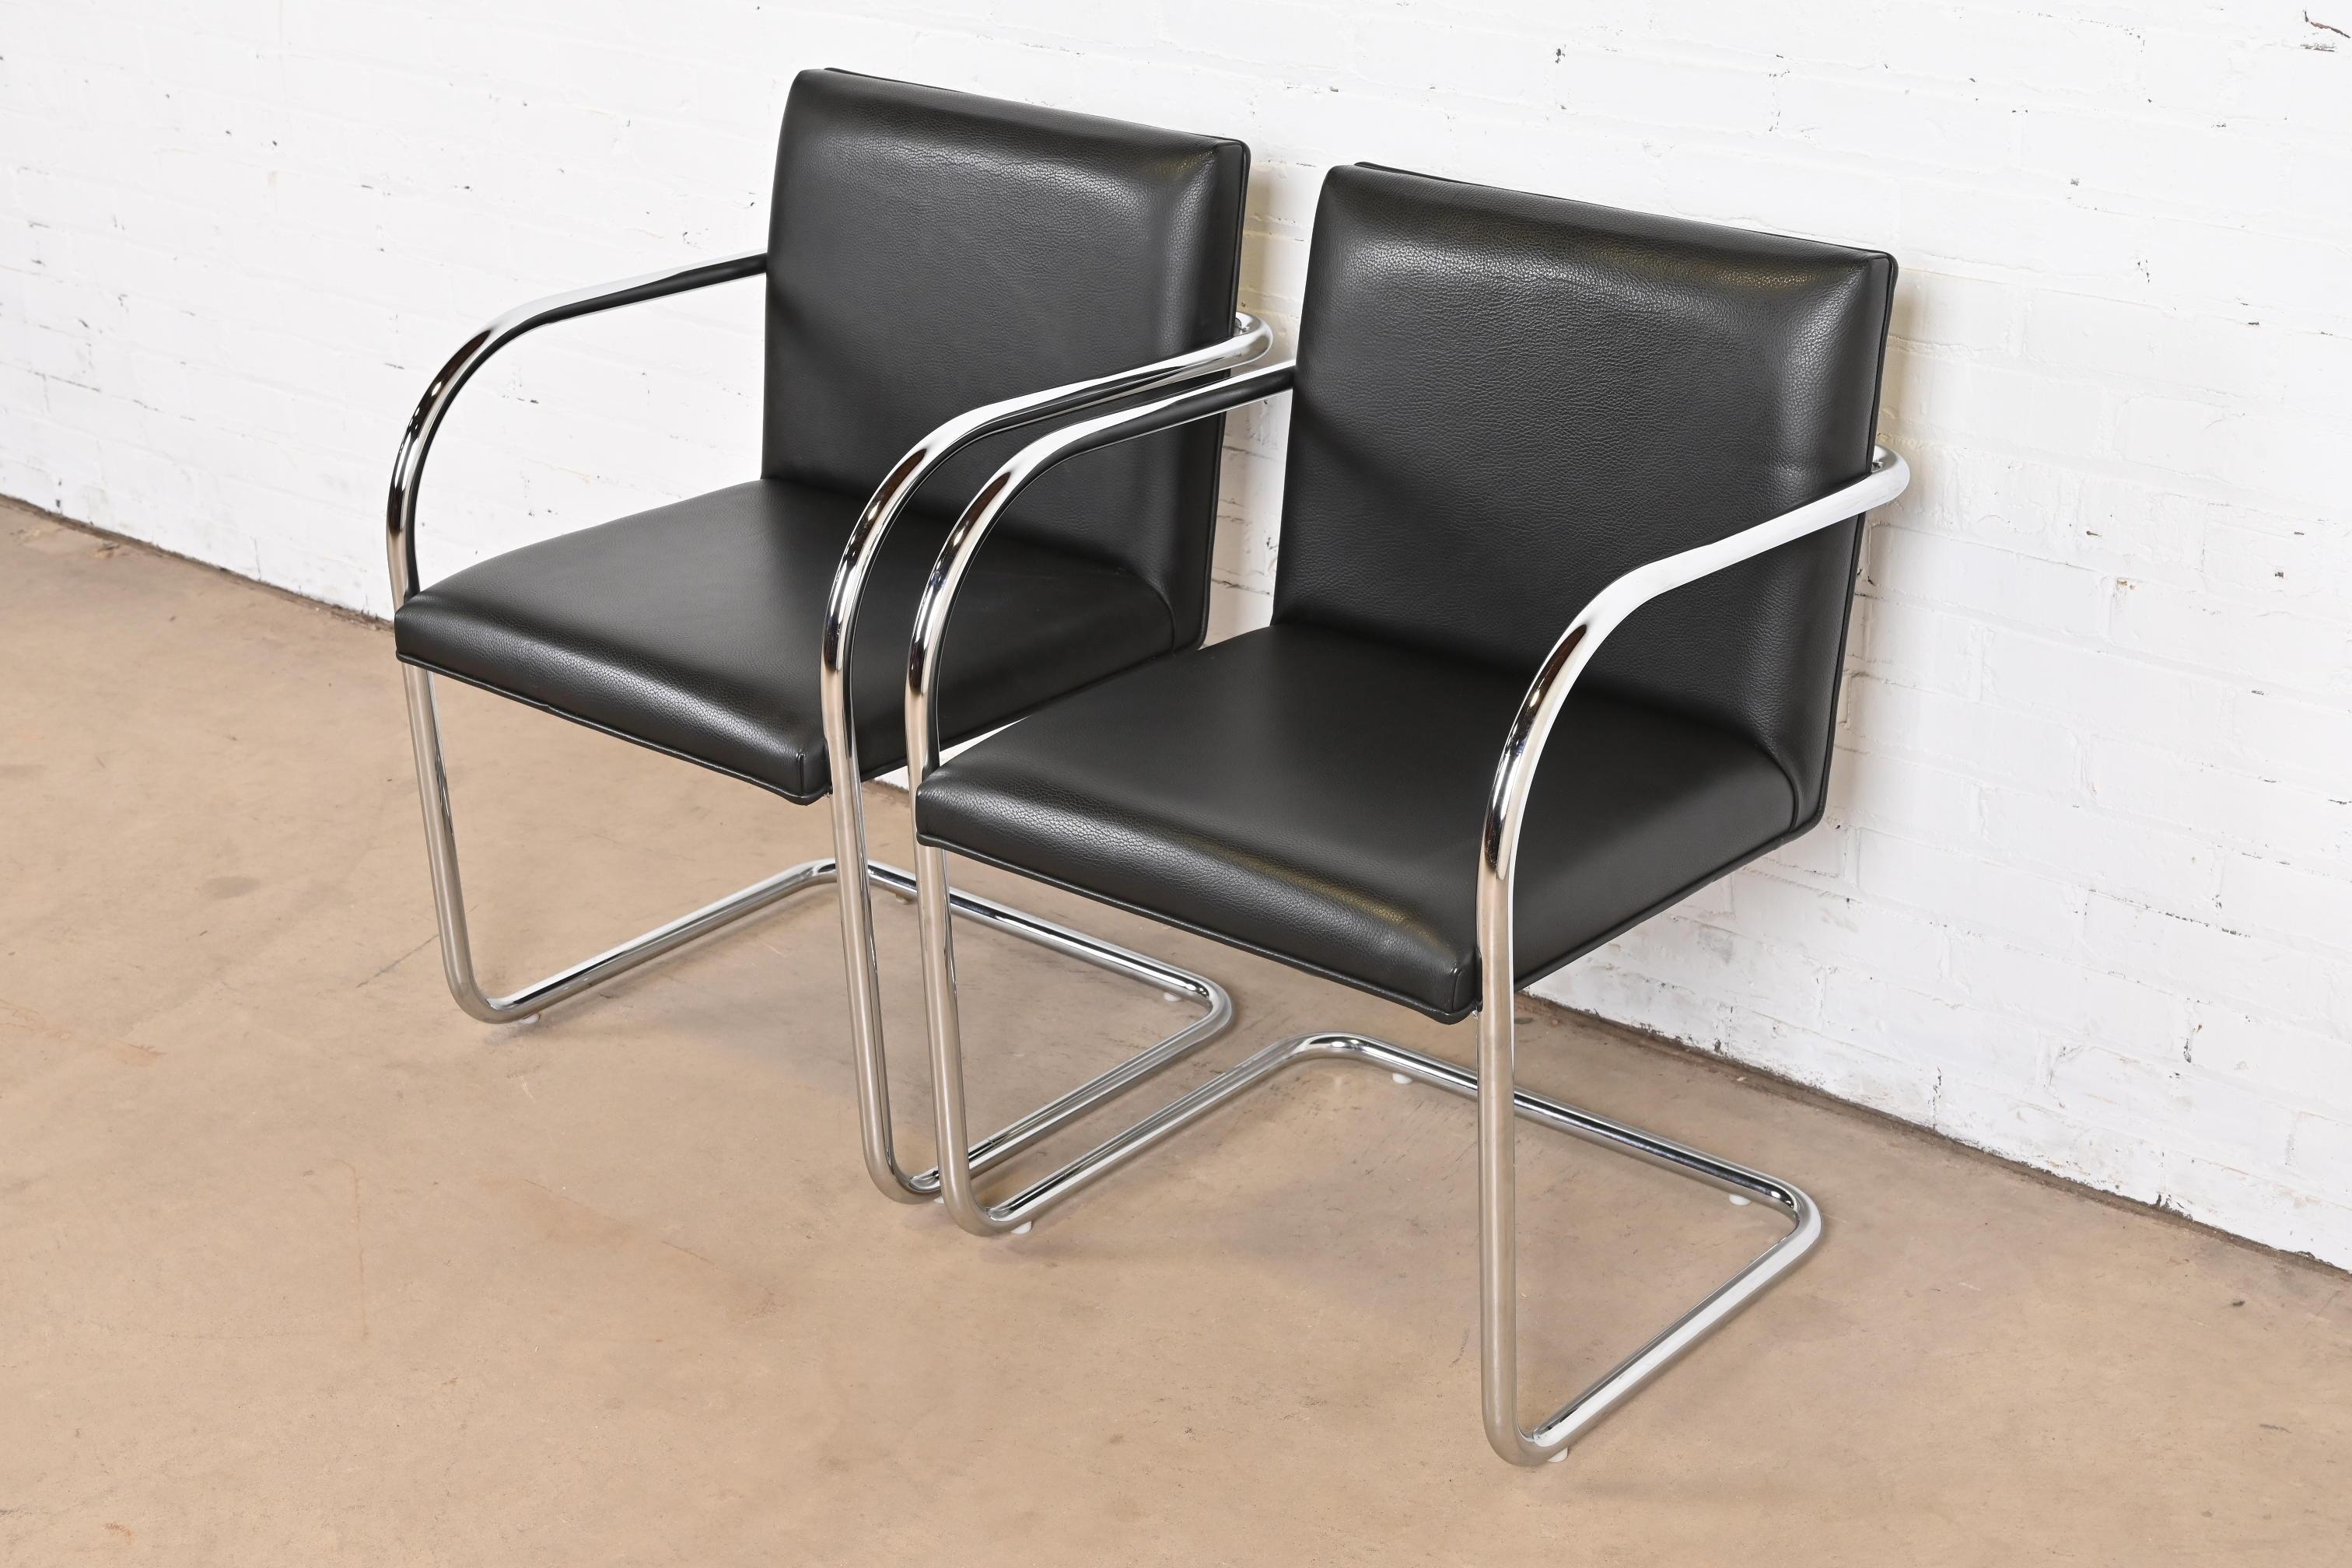 20th Century Mies Van Der Rohe Black Leather and Chrome Brno Chairs, Pair For Sale